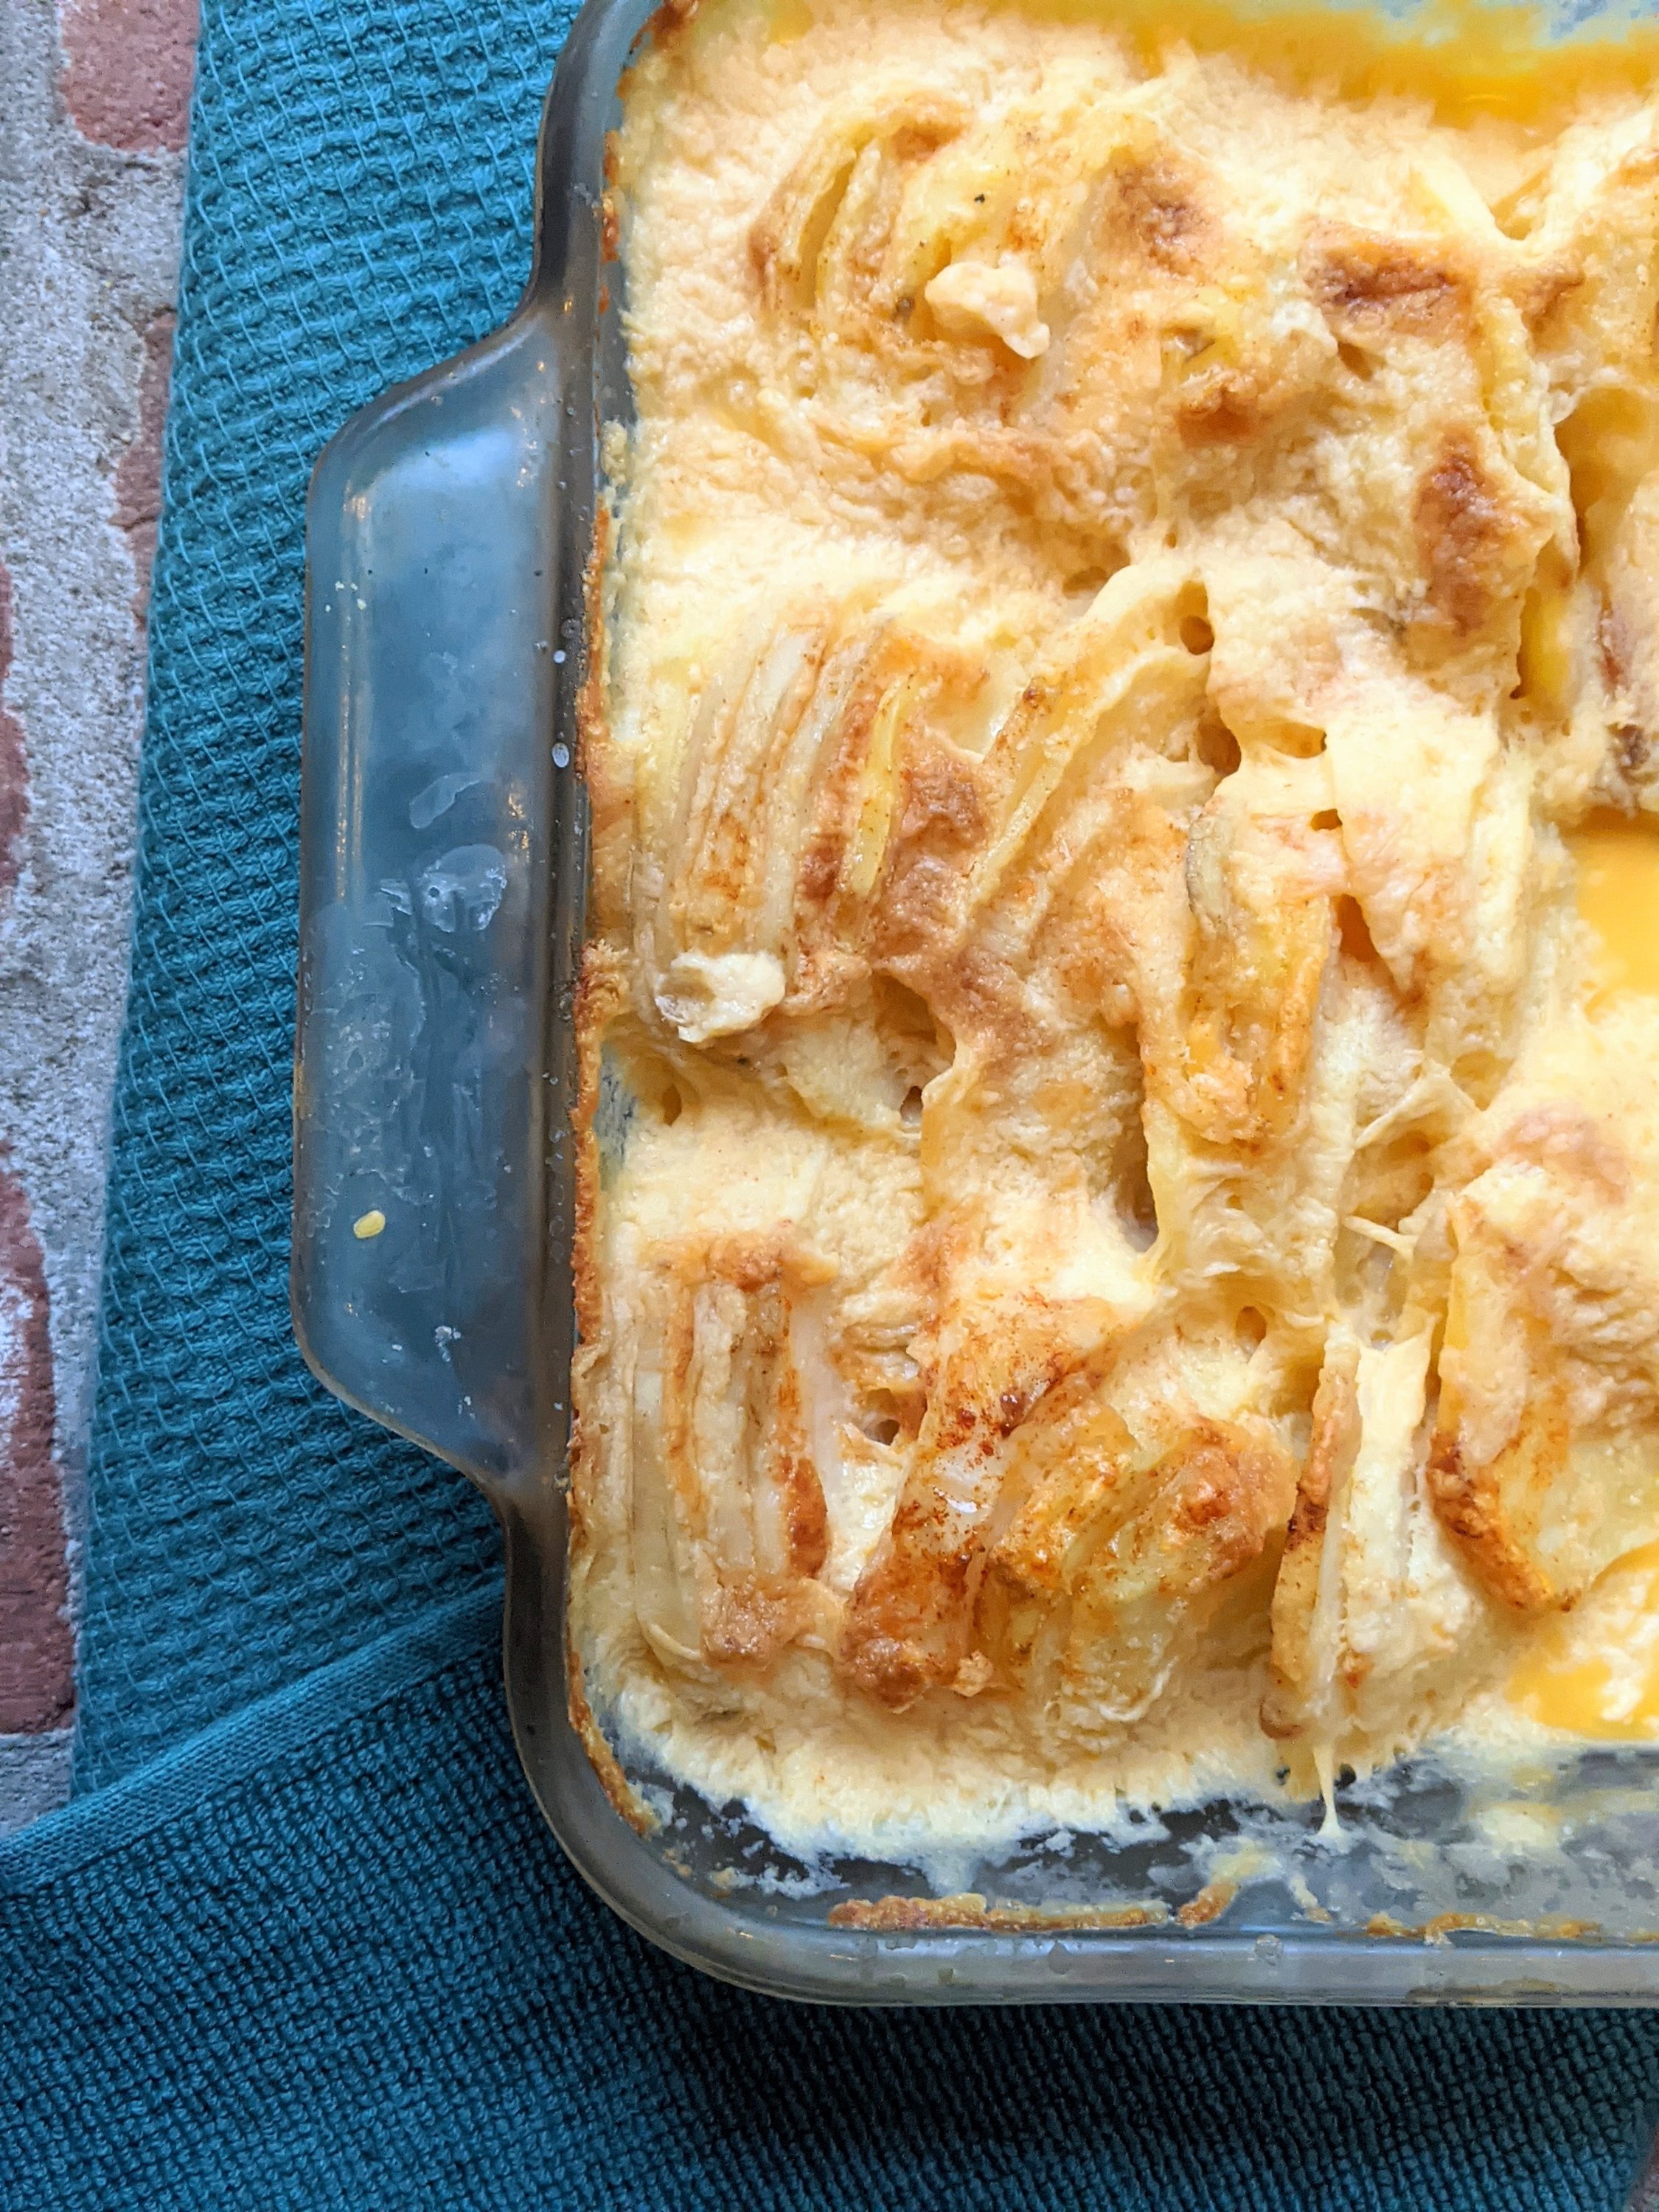 creamy au gratin potatoes recipe baked in the oven healthy melty cheesey potatoes in the oven baking dish